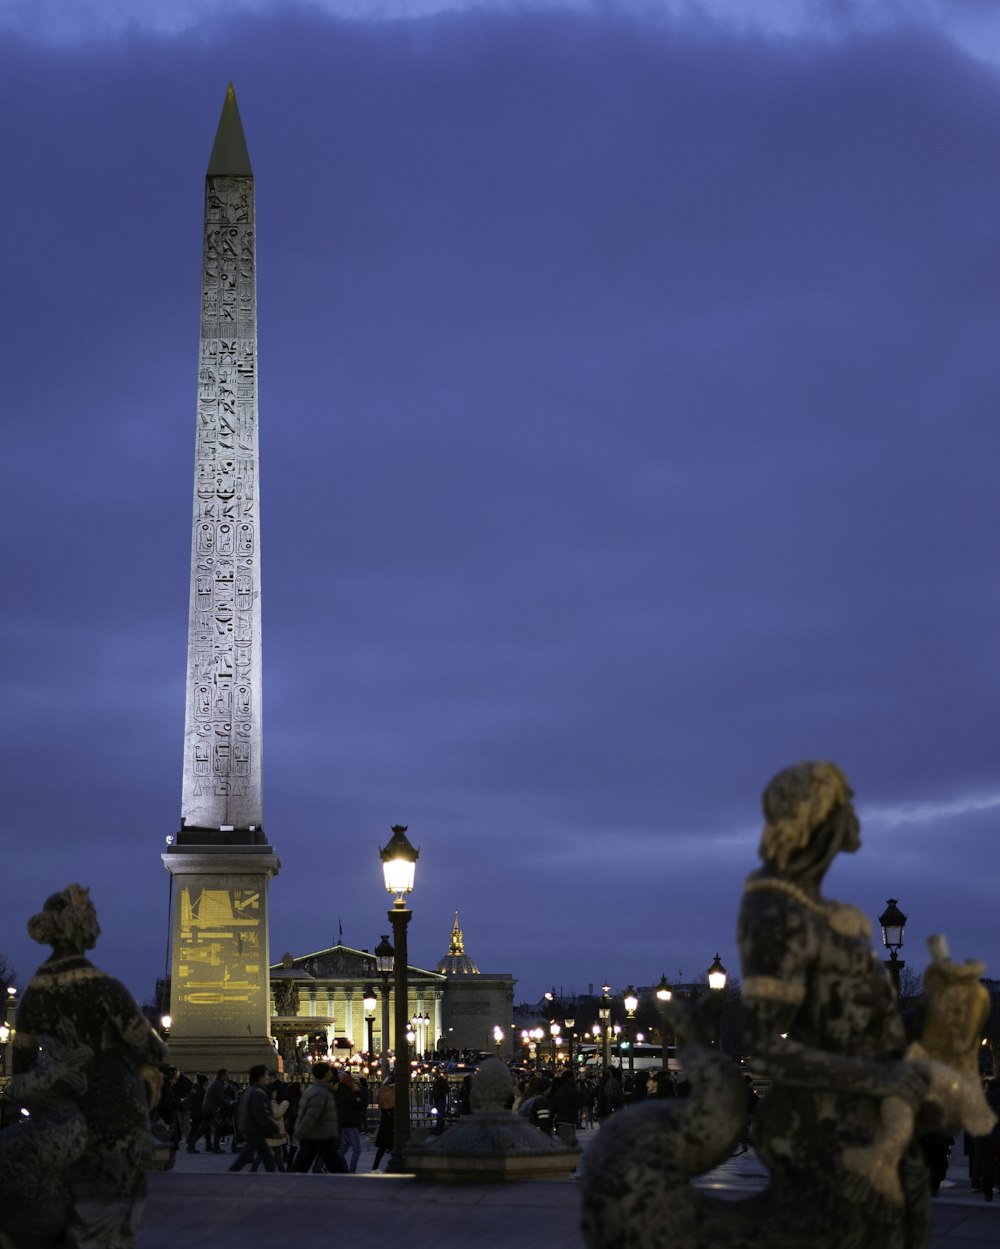 a large obelisk in the middle of a plaza